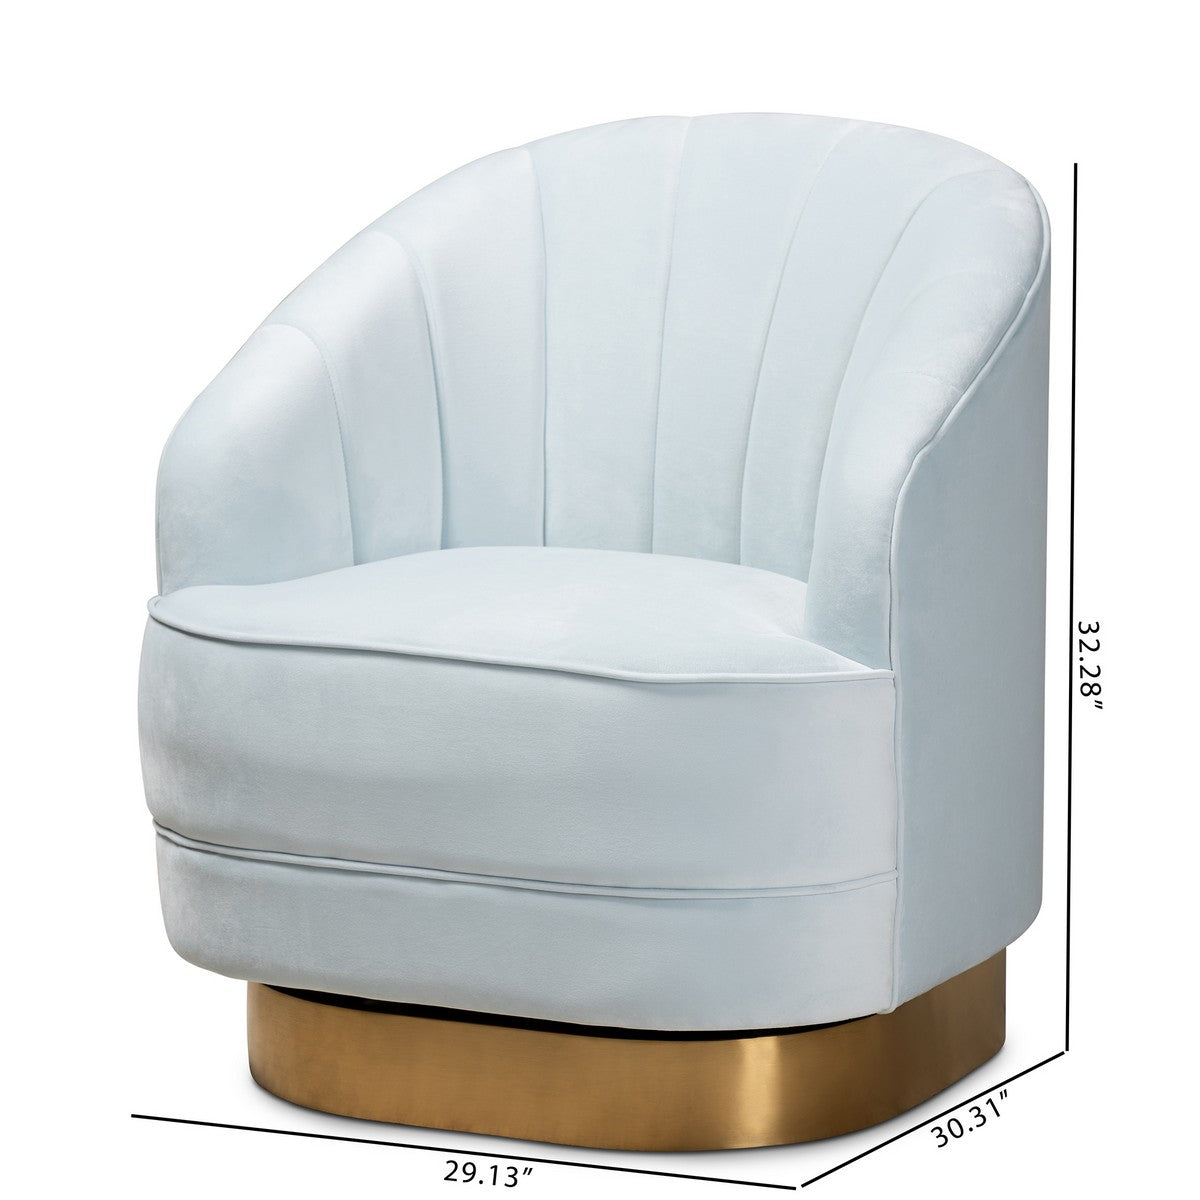 Baxton Studio Fiore Glam and Luxe Light Blue Velvet Fabric Upholstered Brushed Gold Finished Swivel Accent Chair